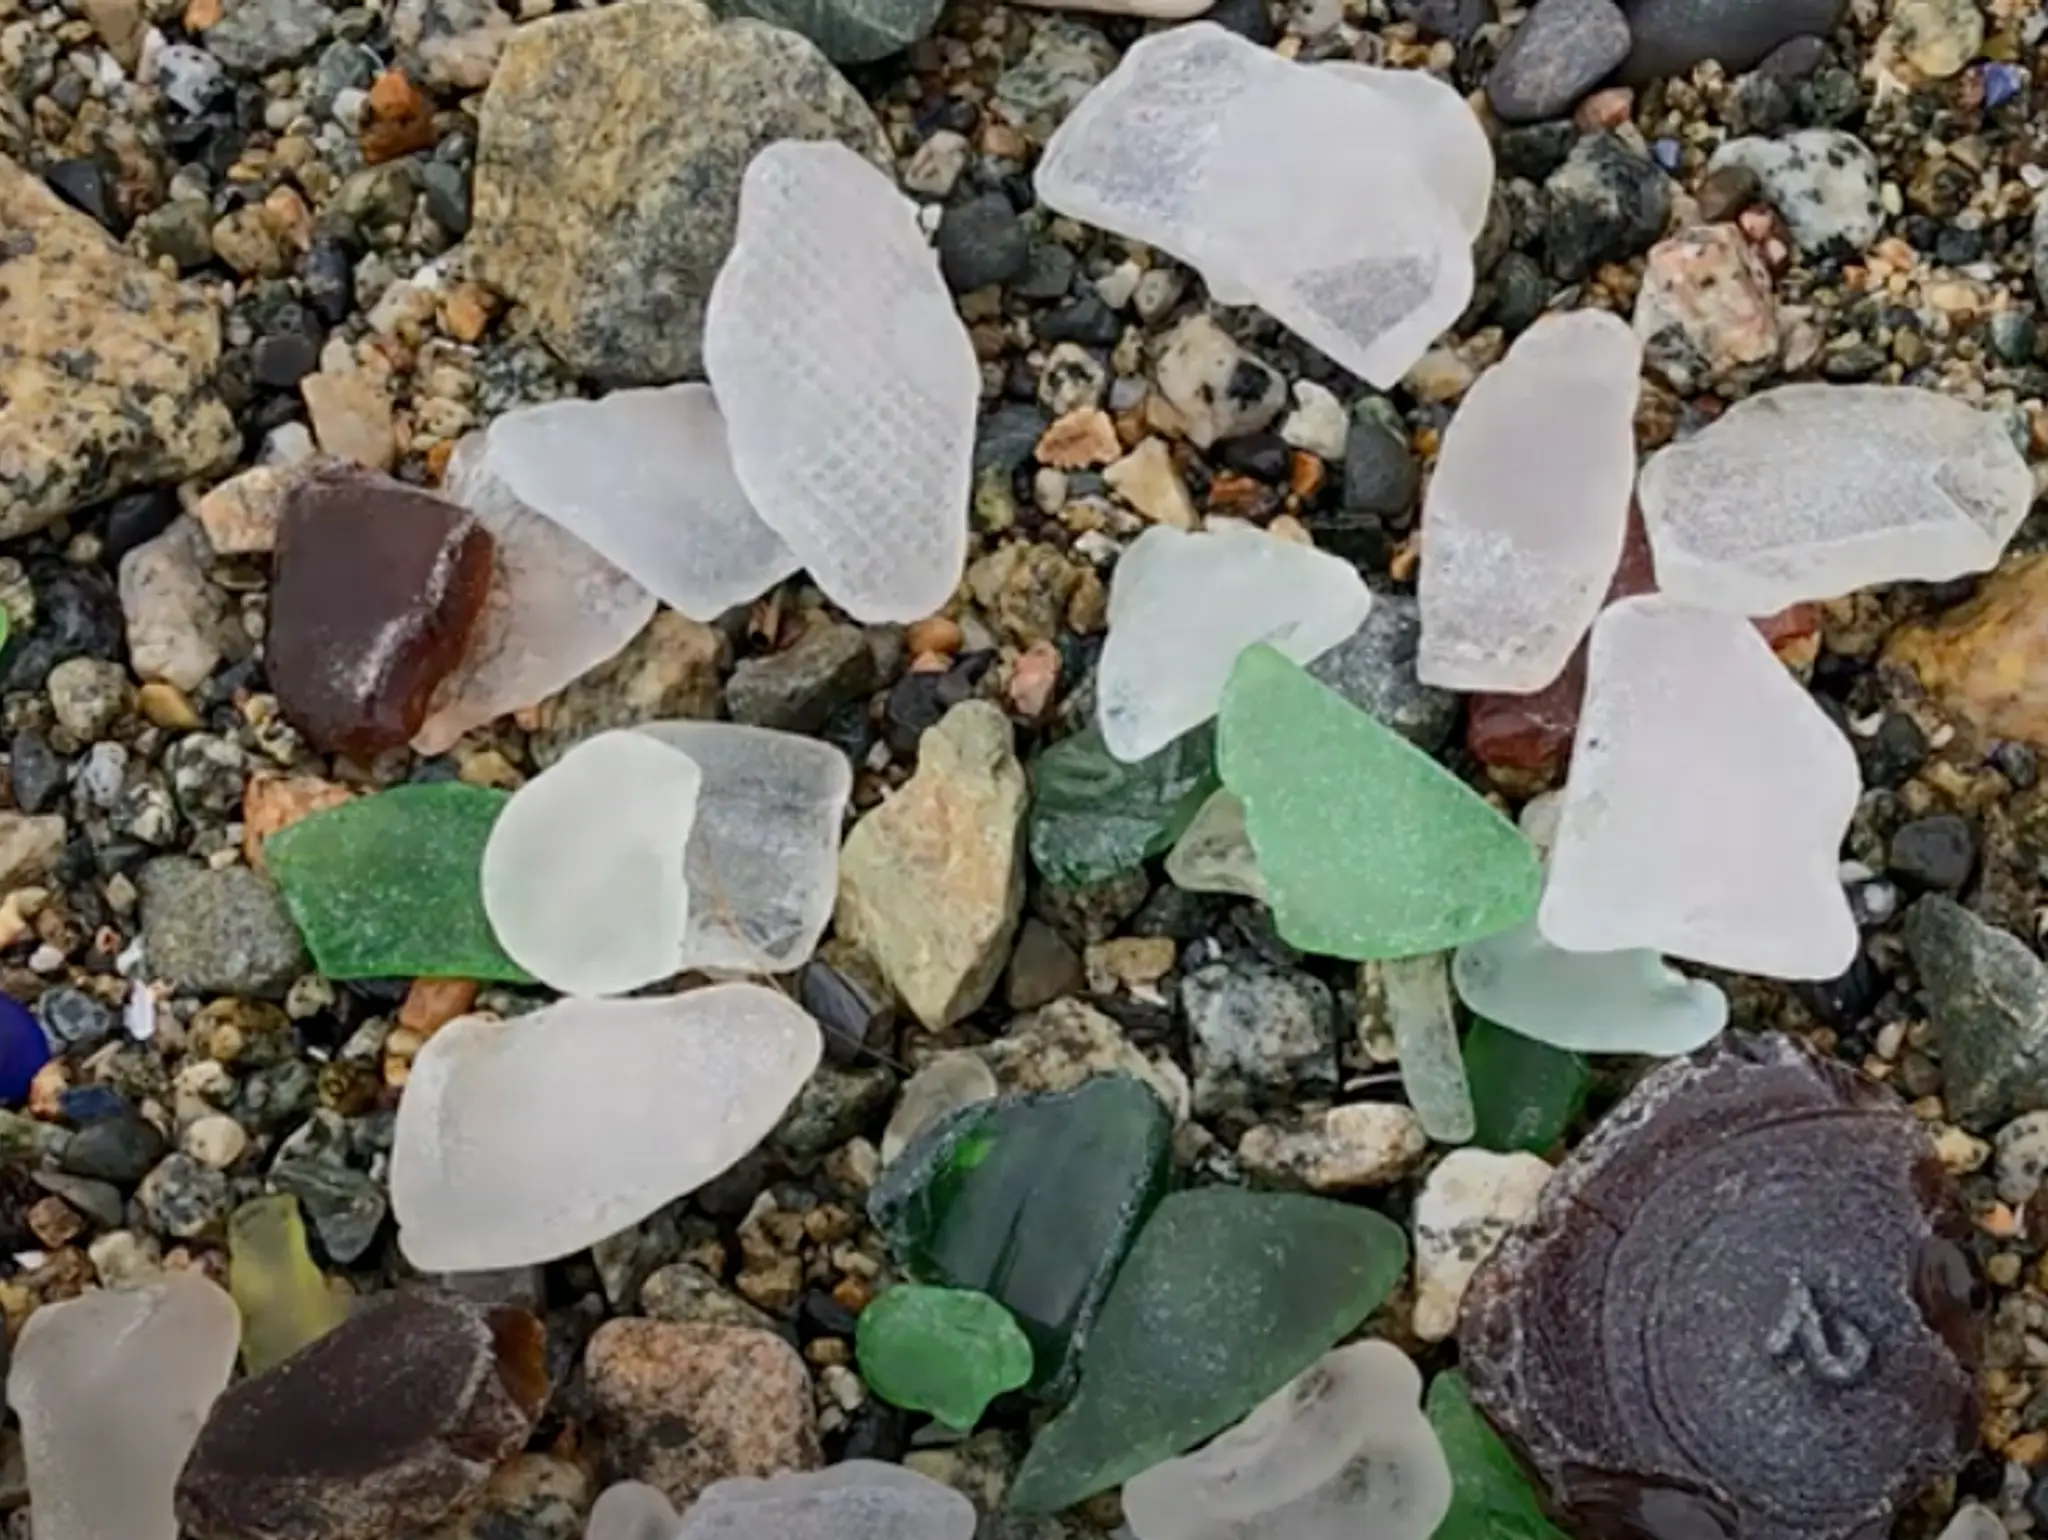 VIDEO: How to Find the Best Sea Glass Beach - 4 Simple Tips